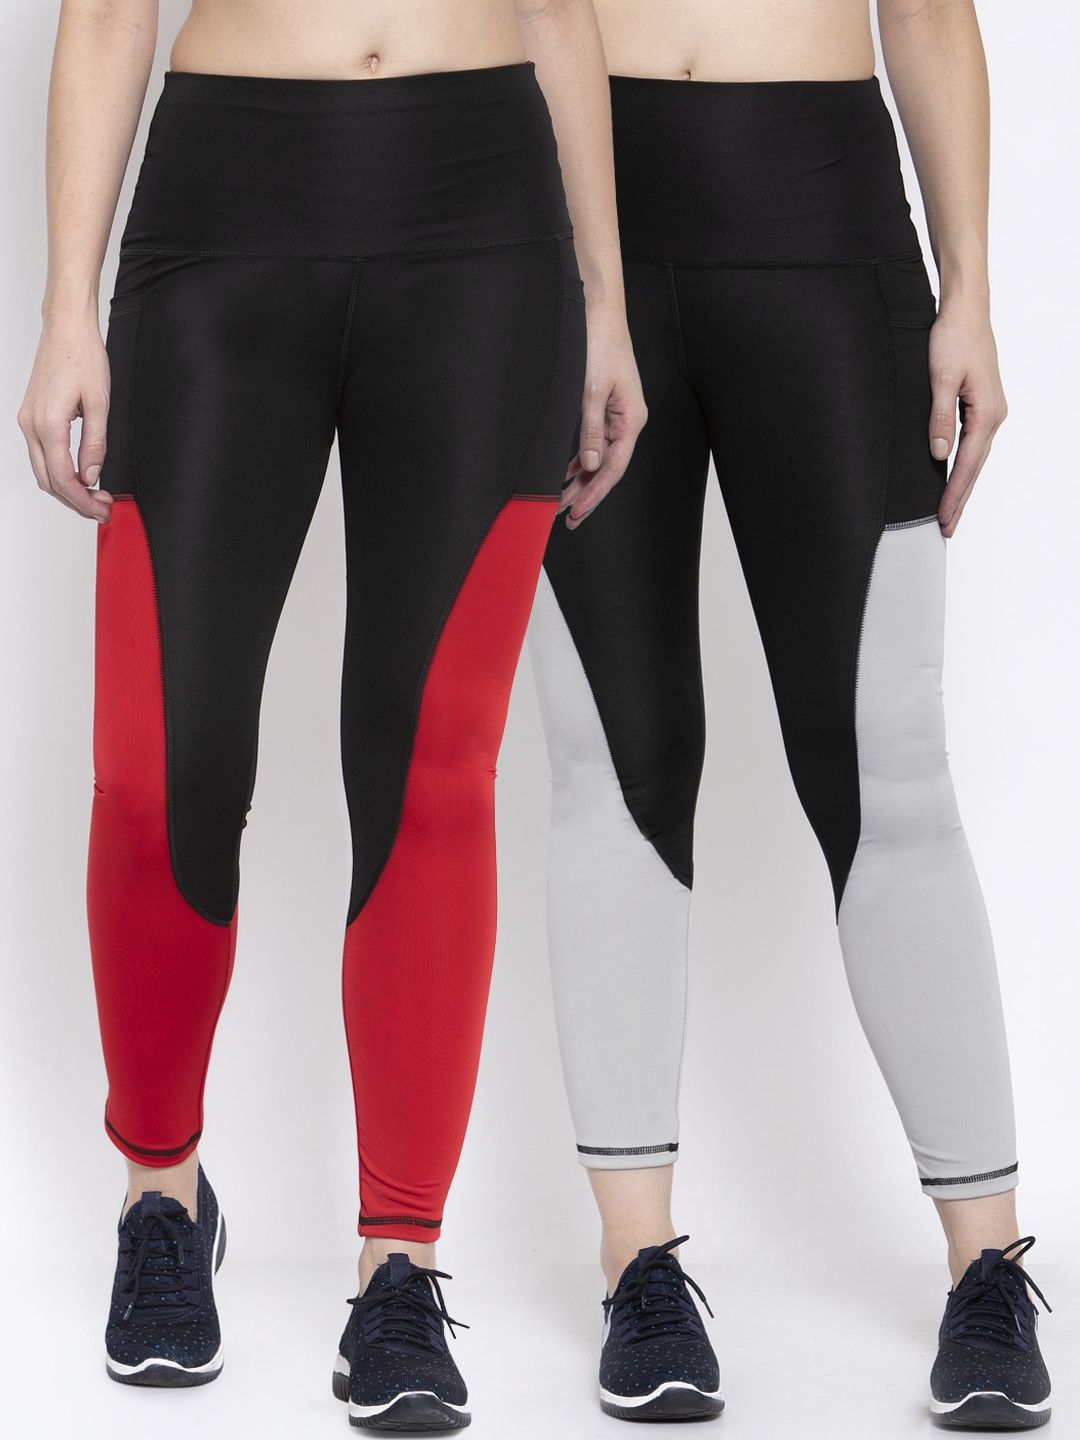 CUKOO Black & Red Set of 2 Gym/ Yoga Track Pants Price in India